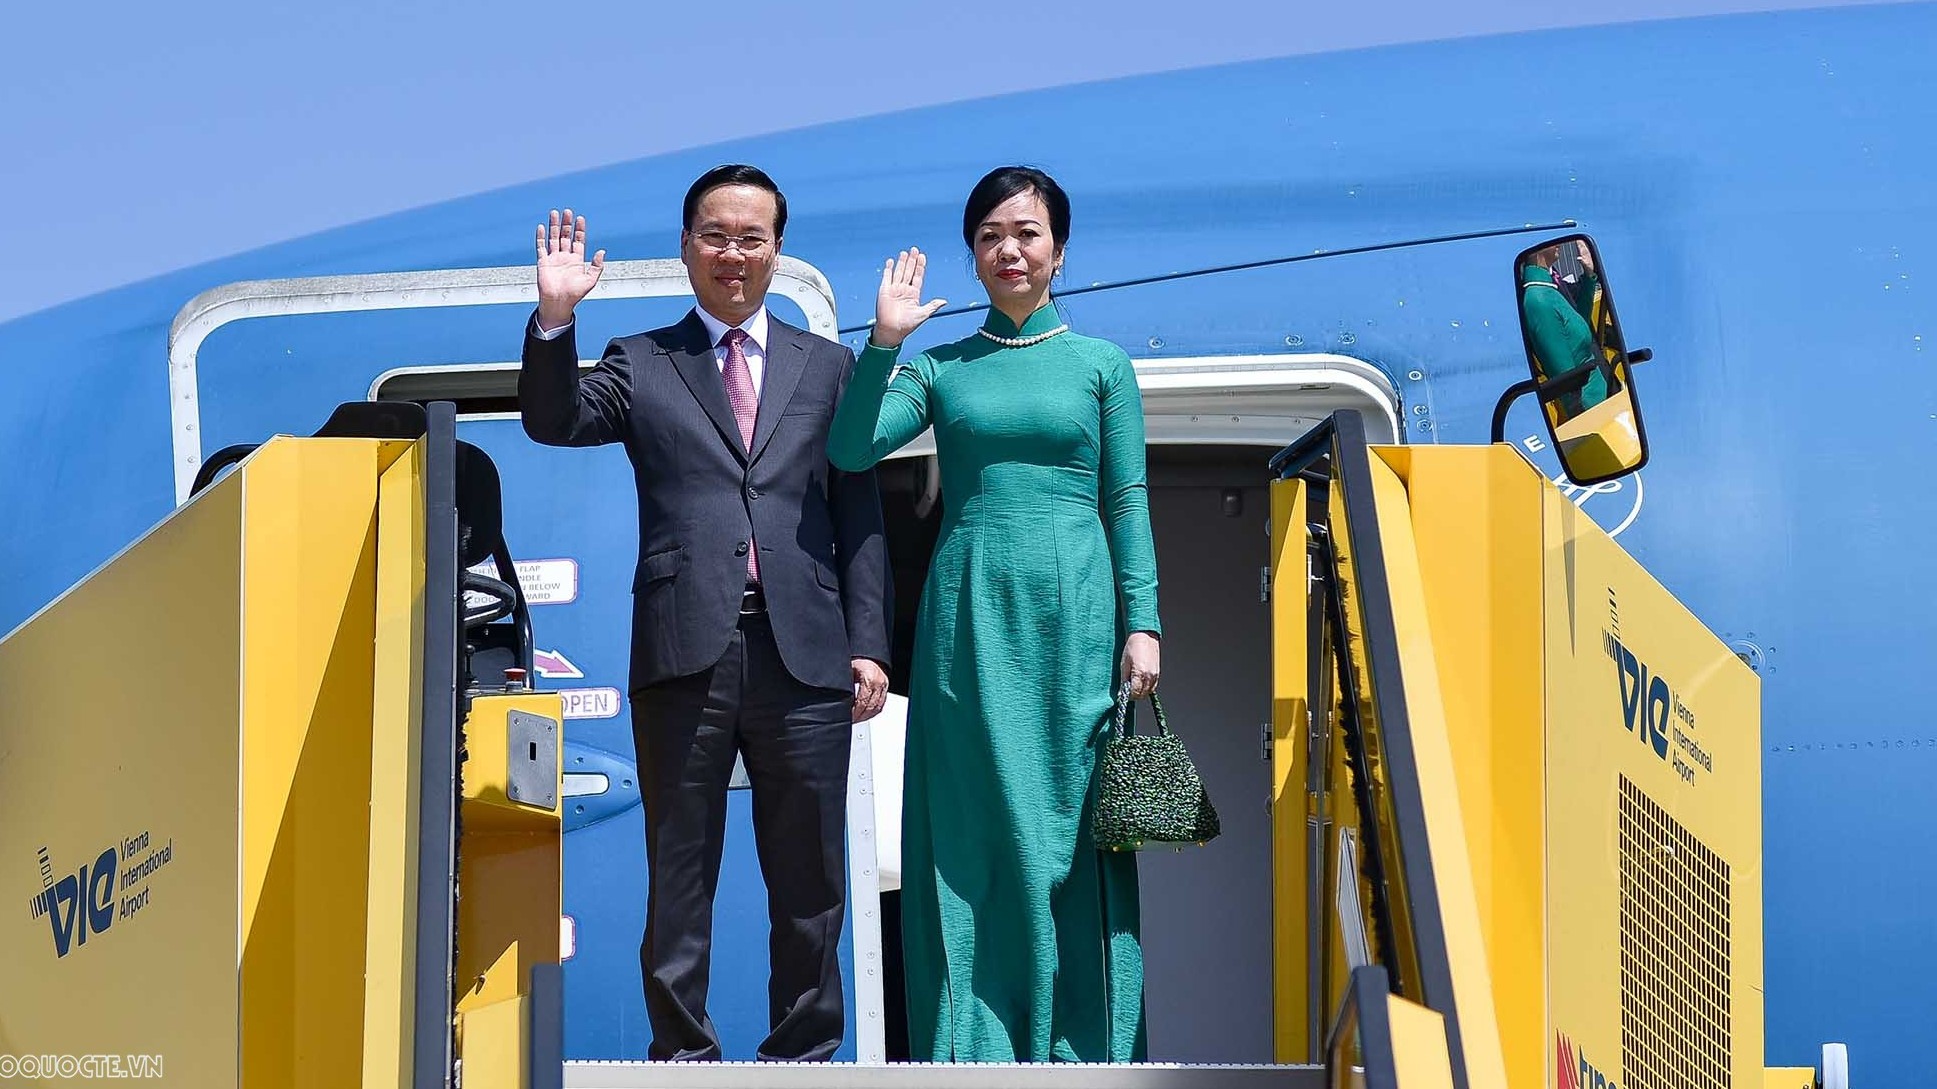 President Vo Van Thuong arrived in Vienna, starting official visit to Austria